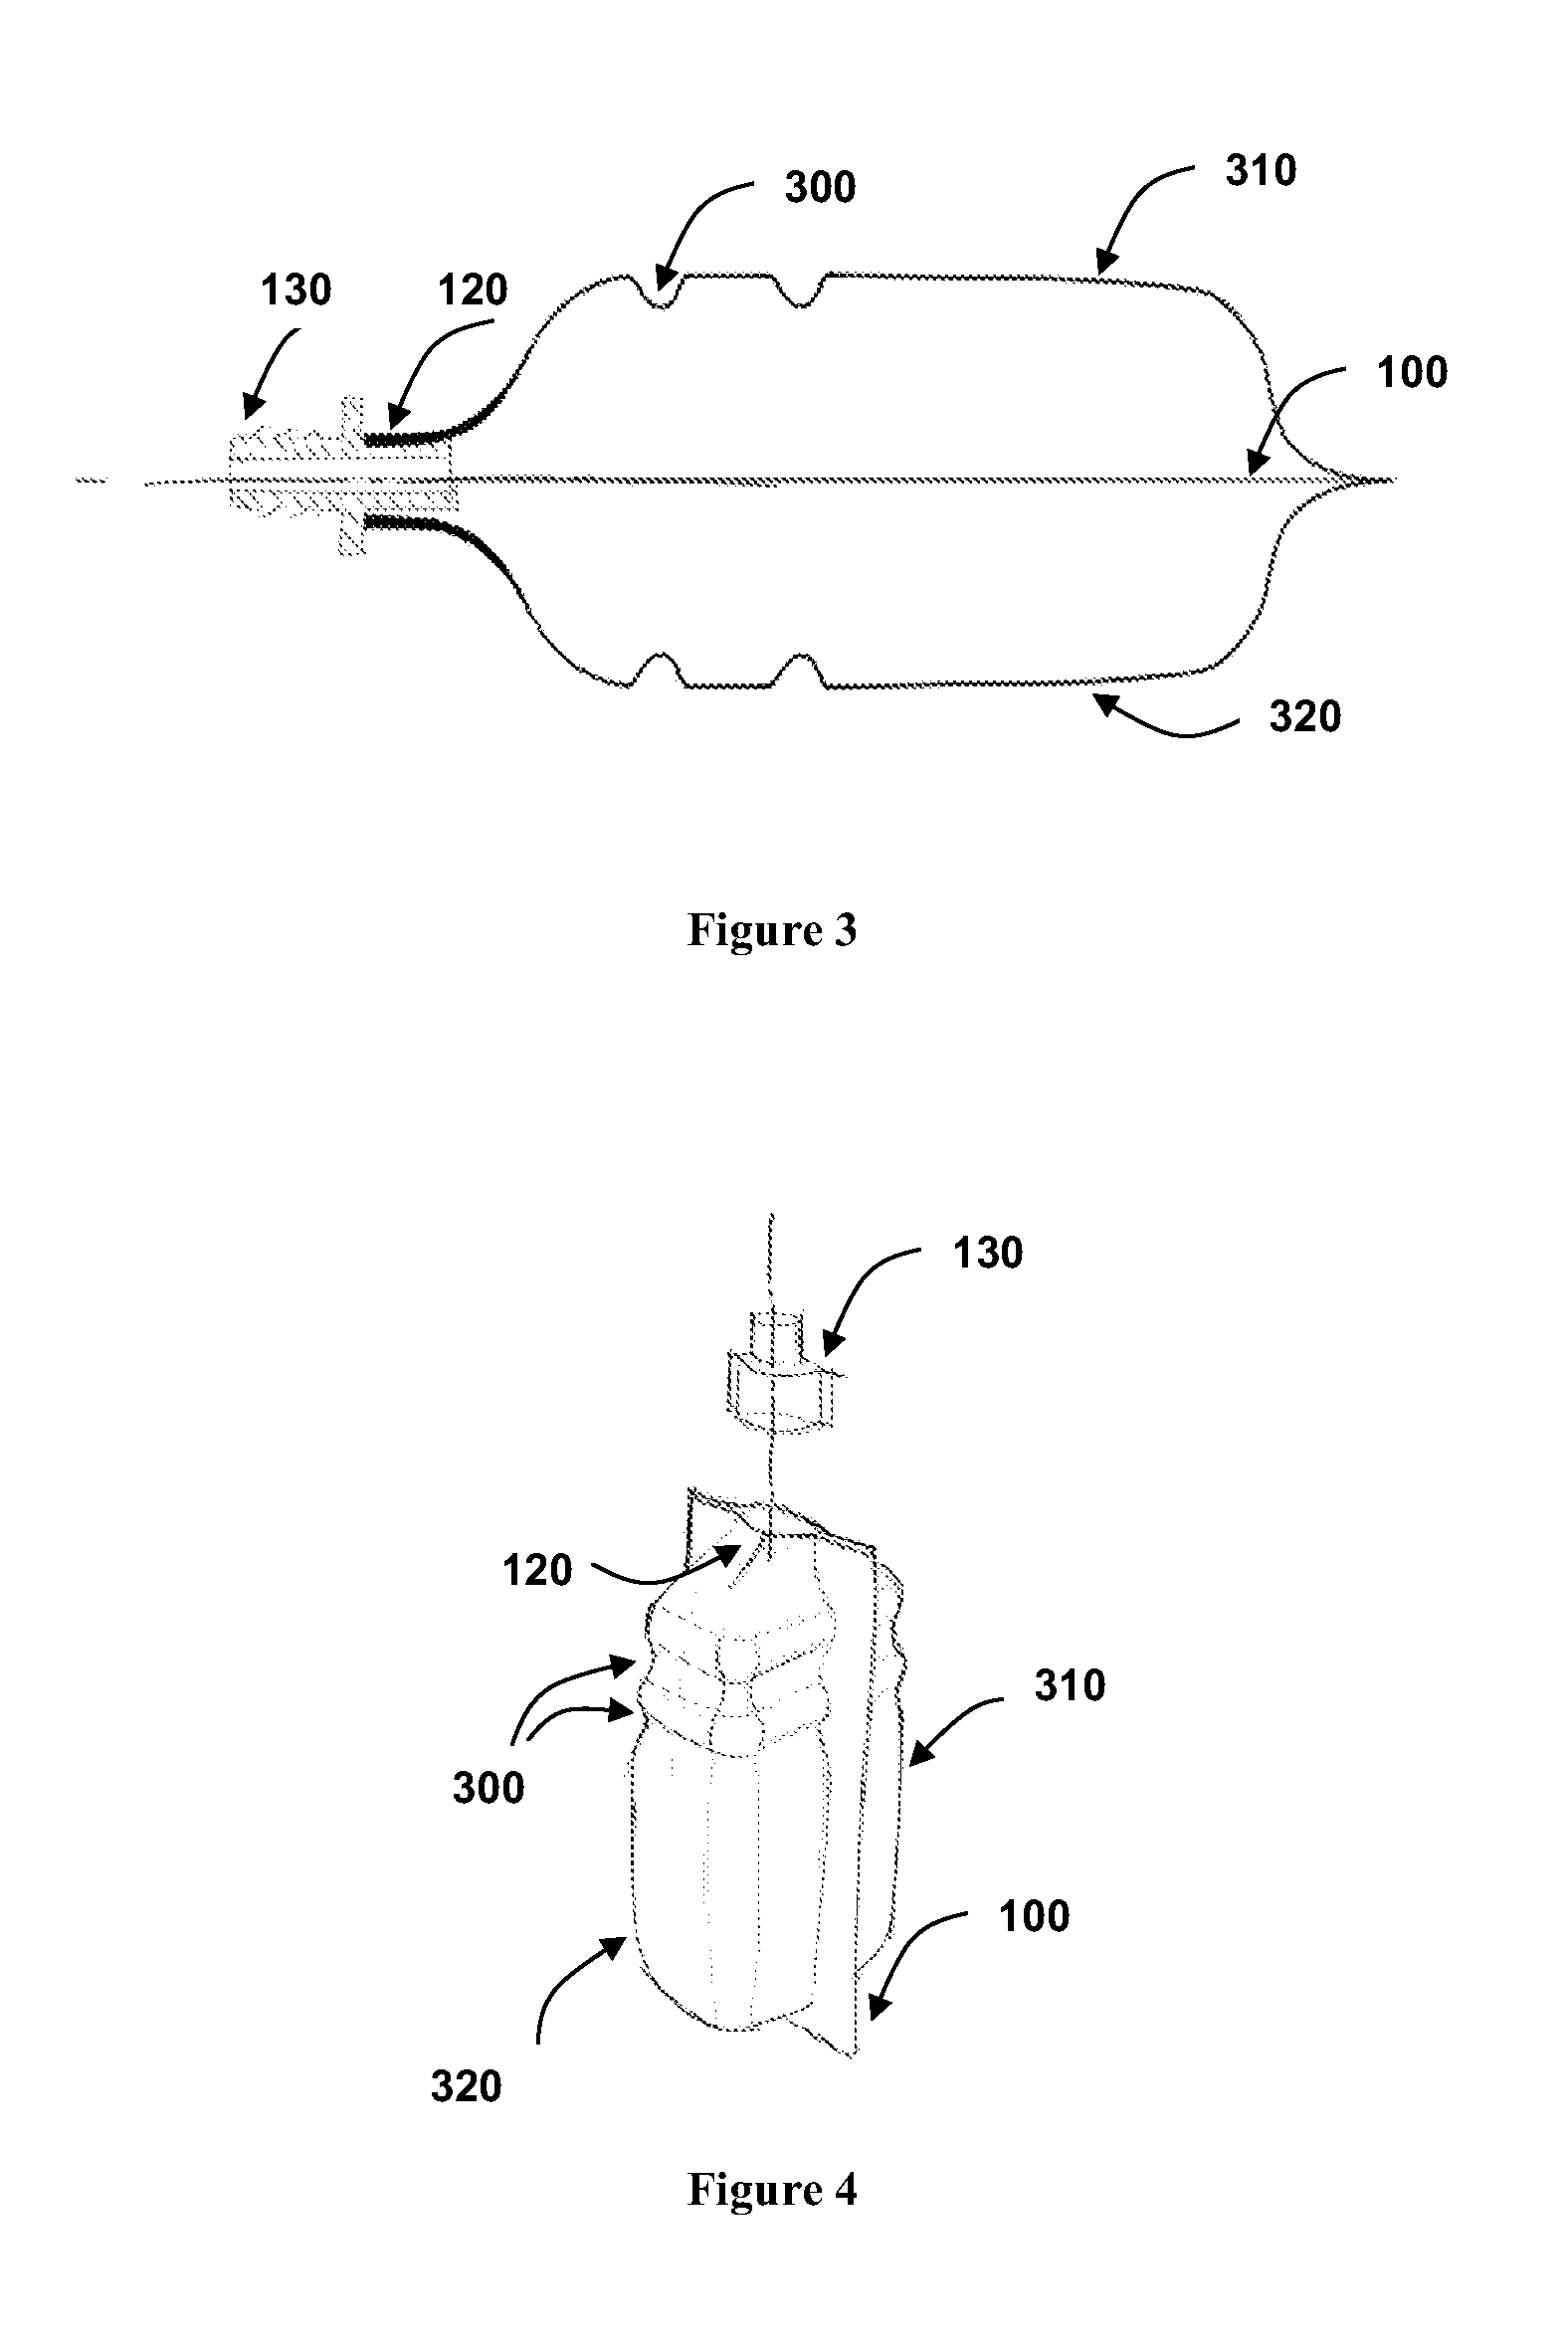 Thermoformed liquid-holding vessels